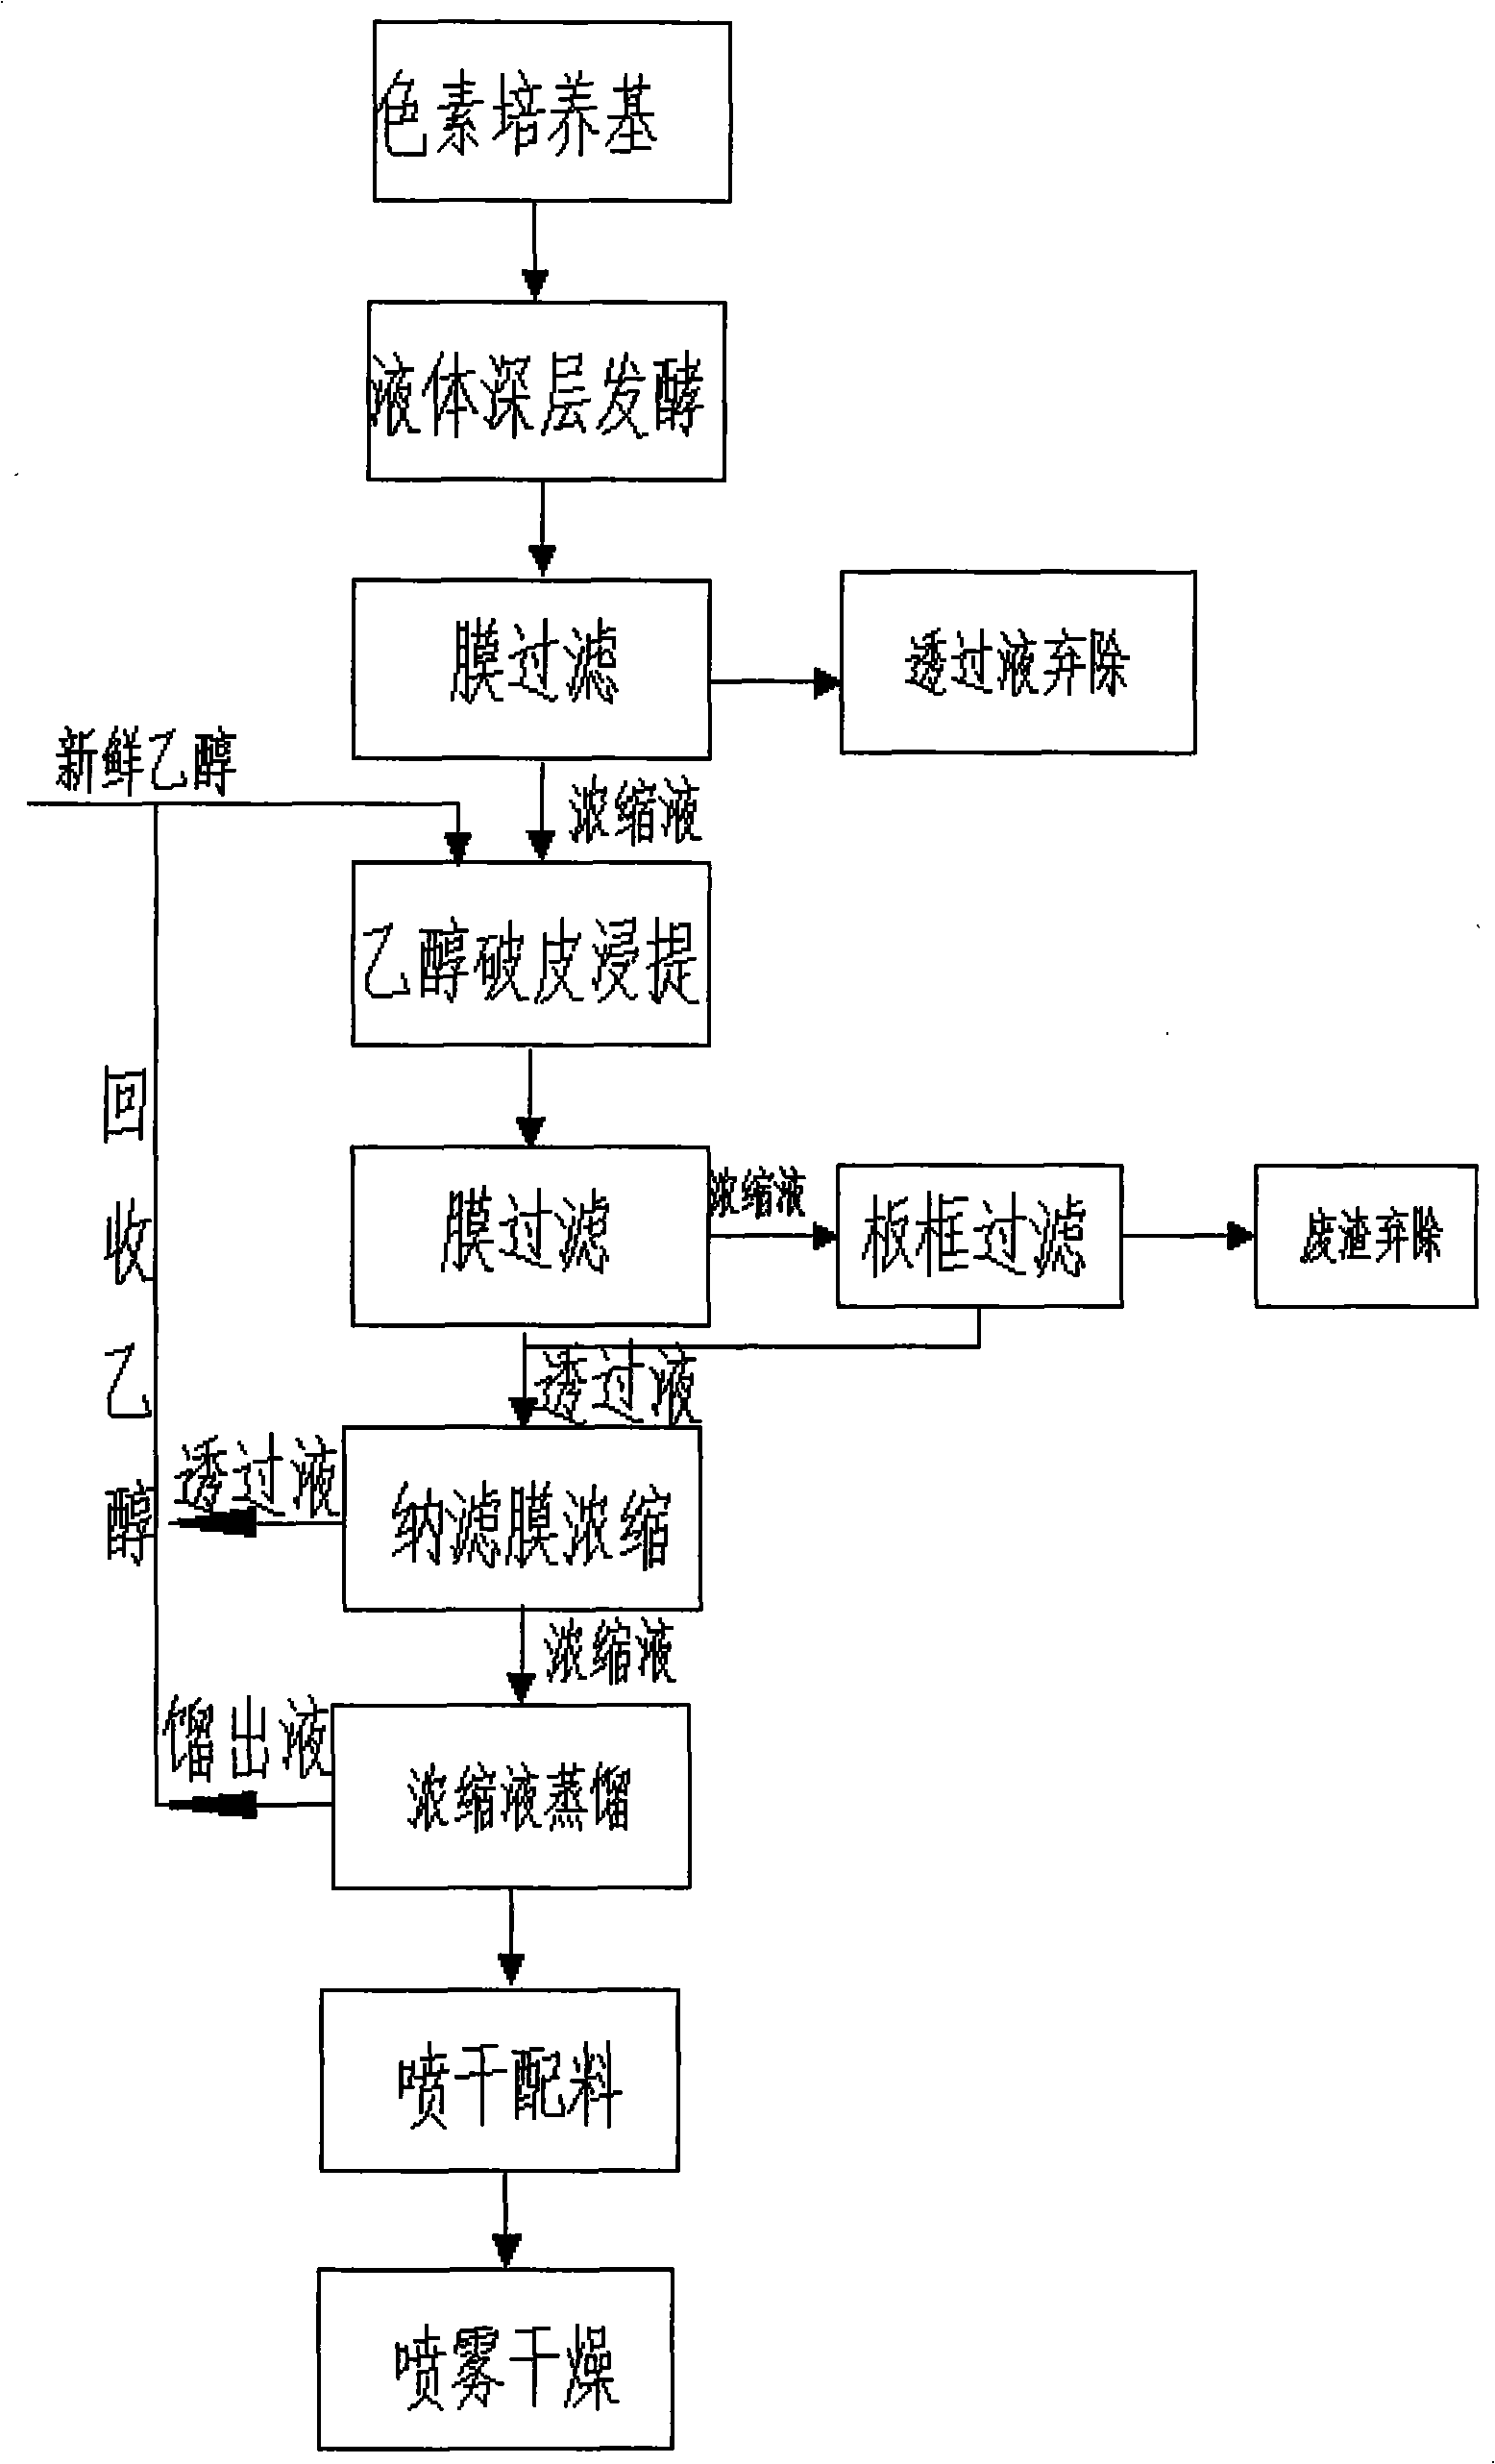 Technological process for producing red pigment by integrated membrane system